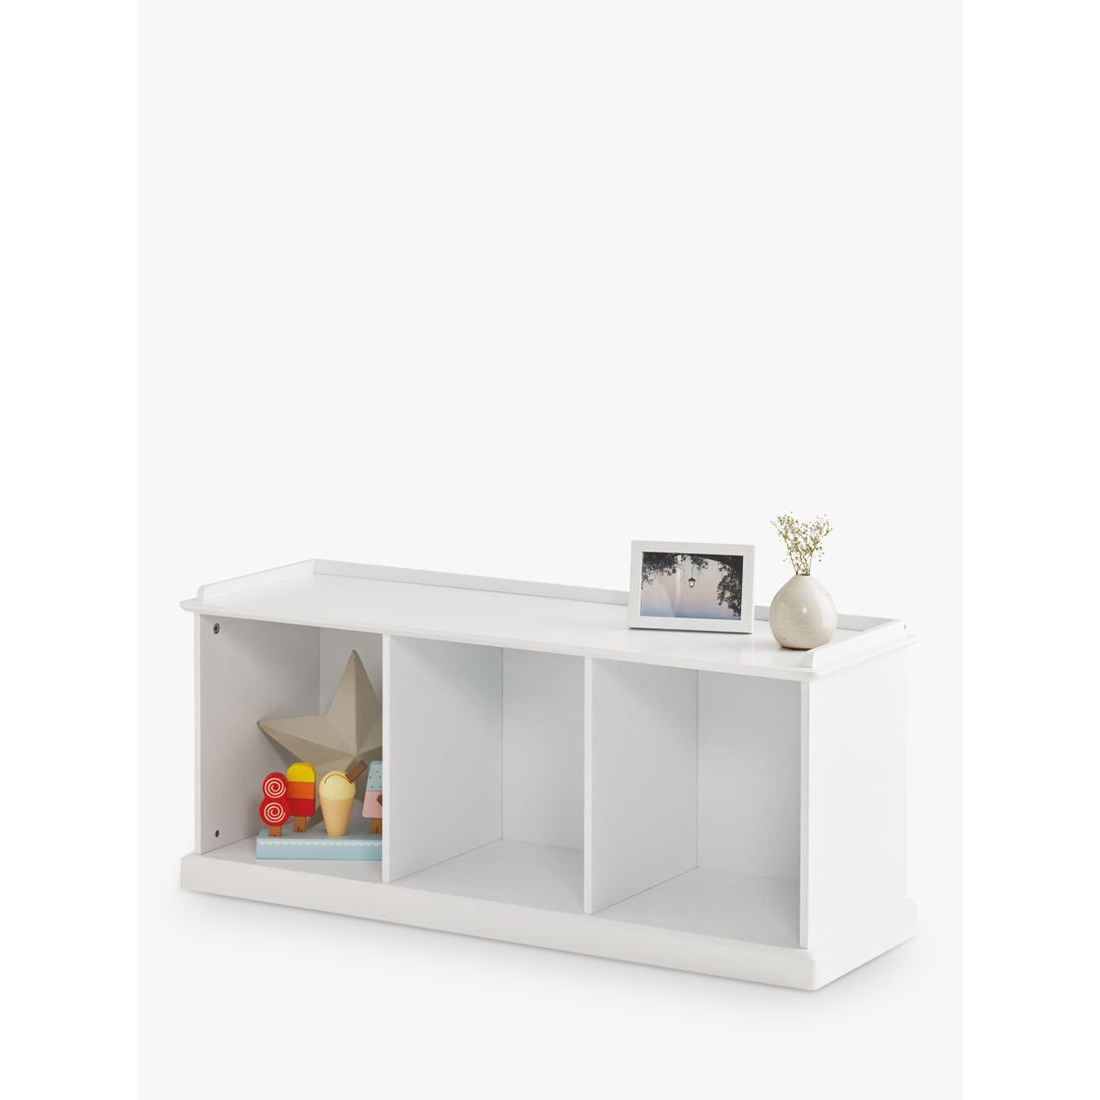 Great Little Trading Co Abbeville Storage Bench, White - image 1